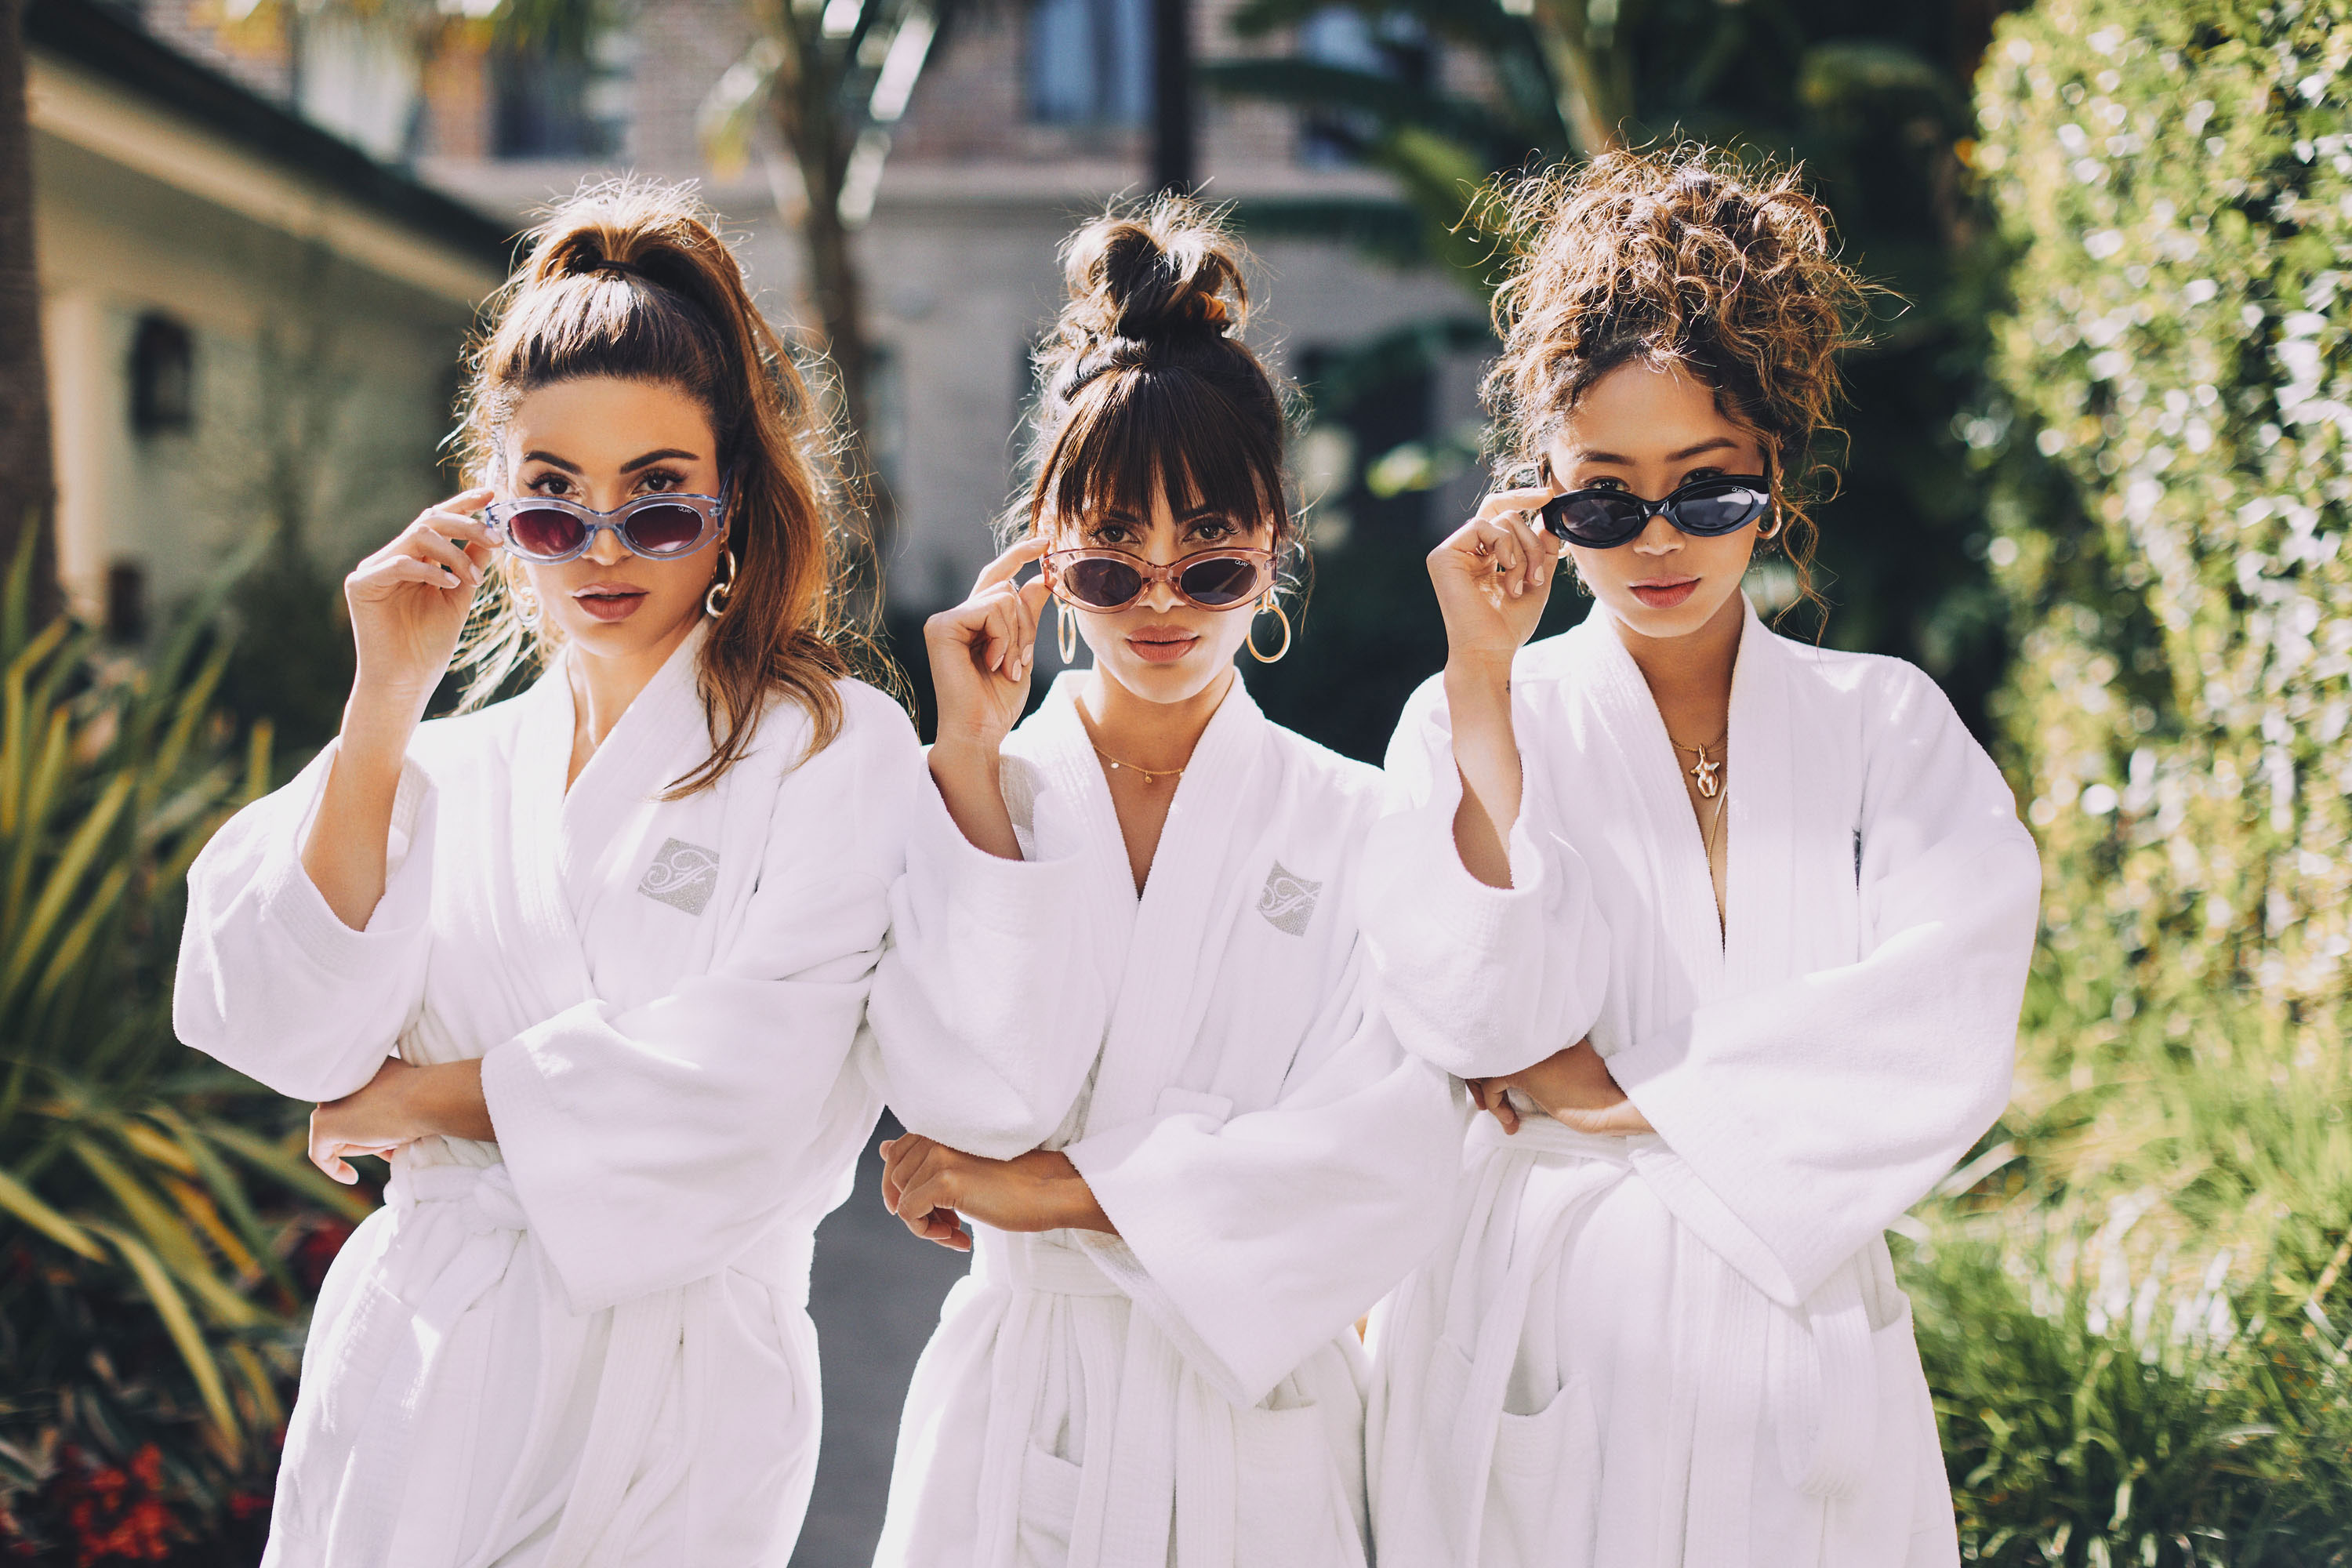 Style influencer Camila Coelho shares her tips for getting the perfect  Insta-ready vacation pics - Good Morning America